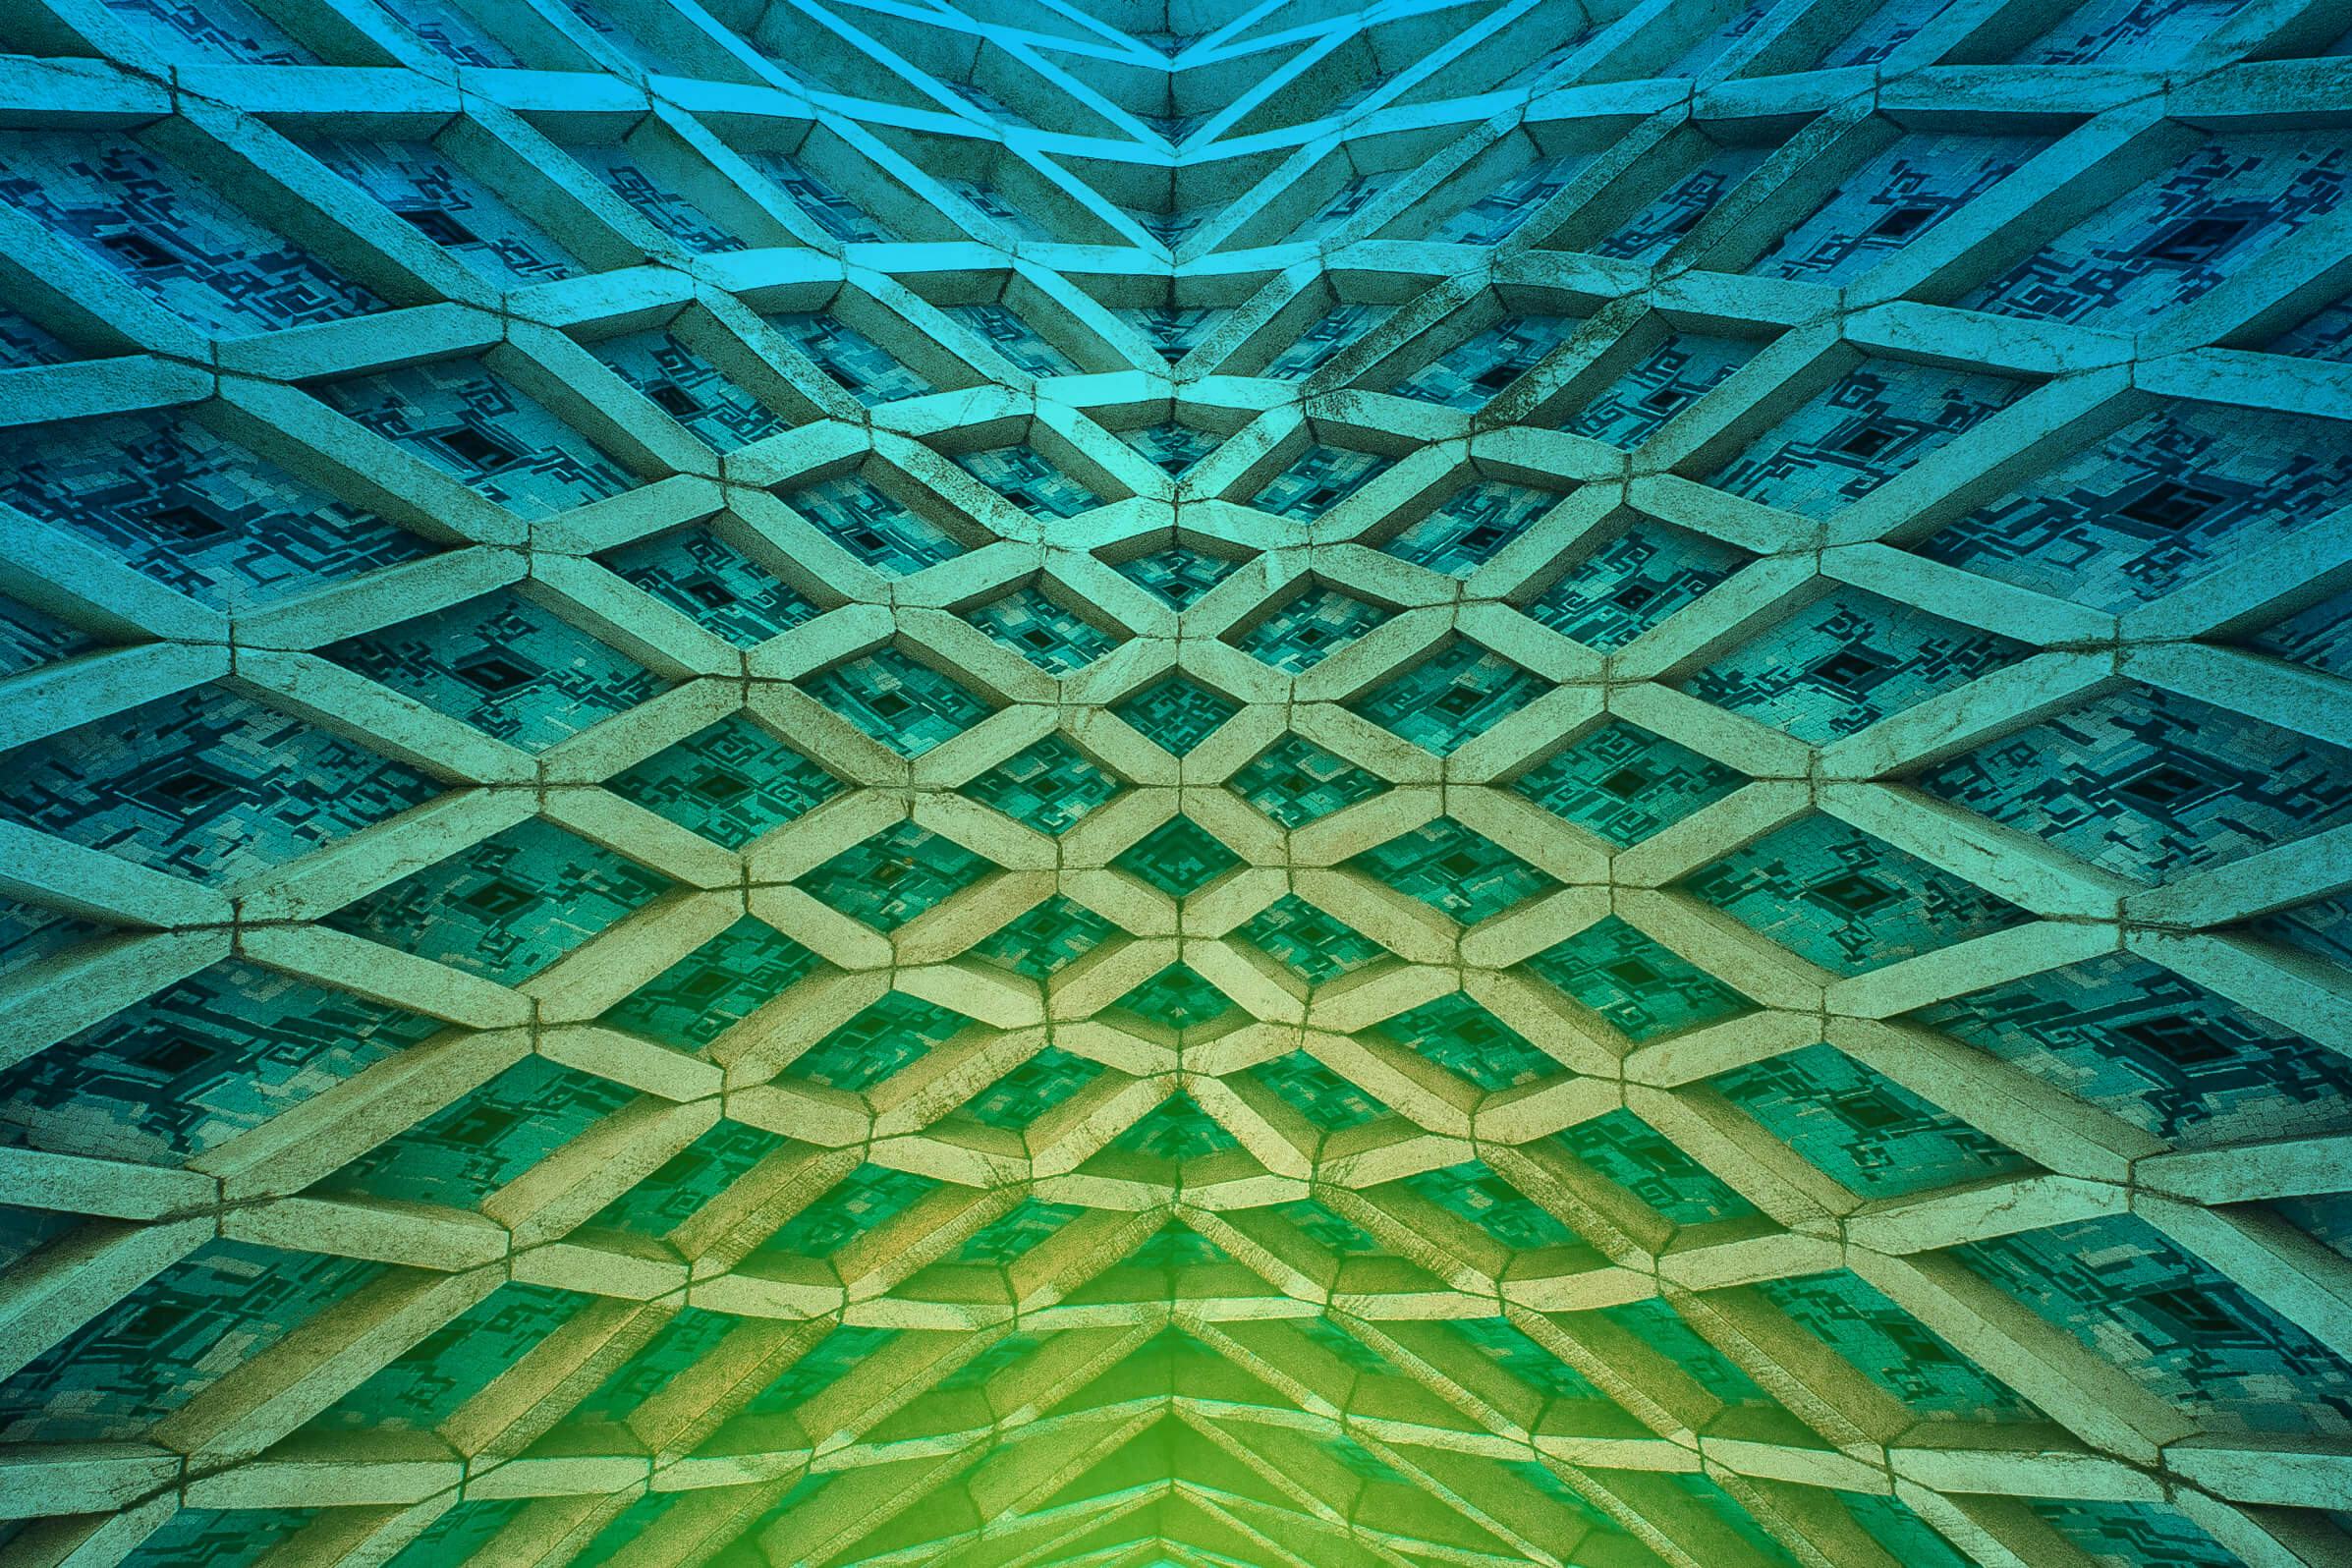 Architecturally abstract geometric pattern, cross-weave depicted in blues and greens